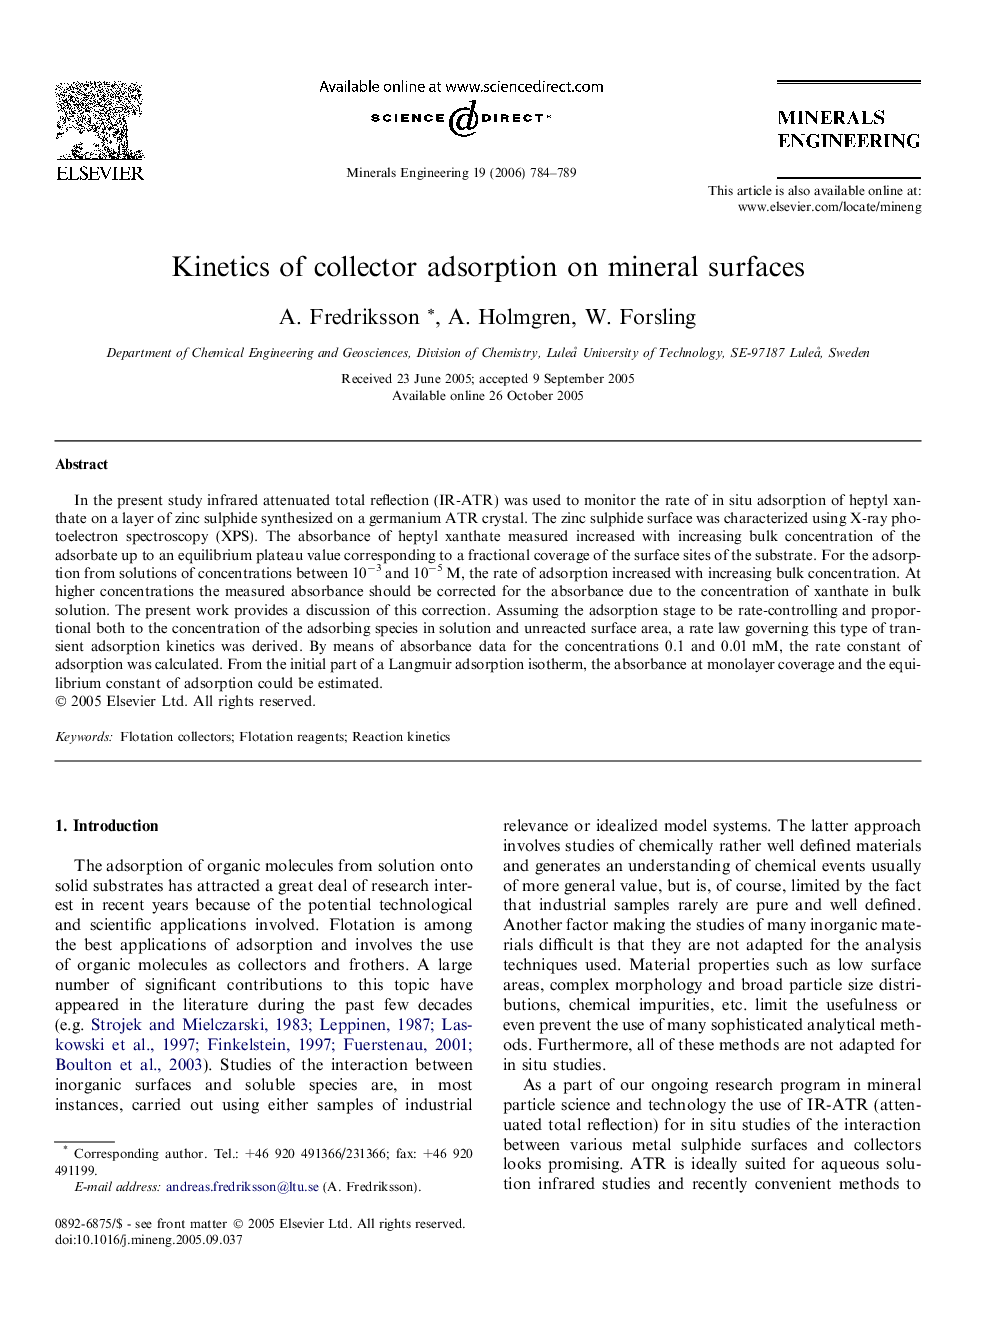 Kinetics of collector adsorption on mineral surfaces